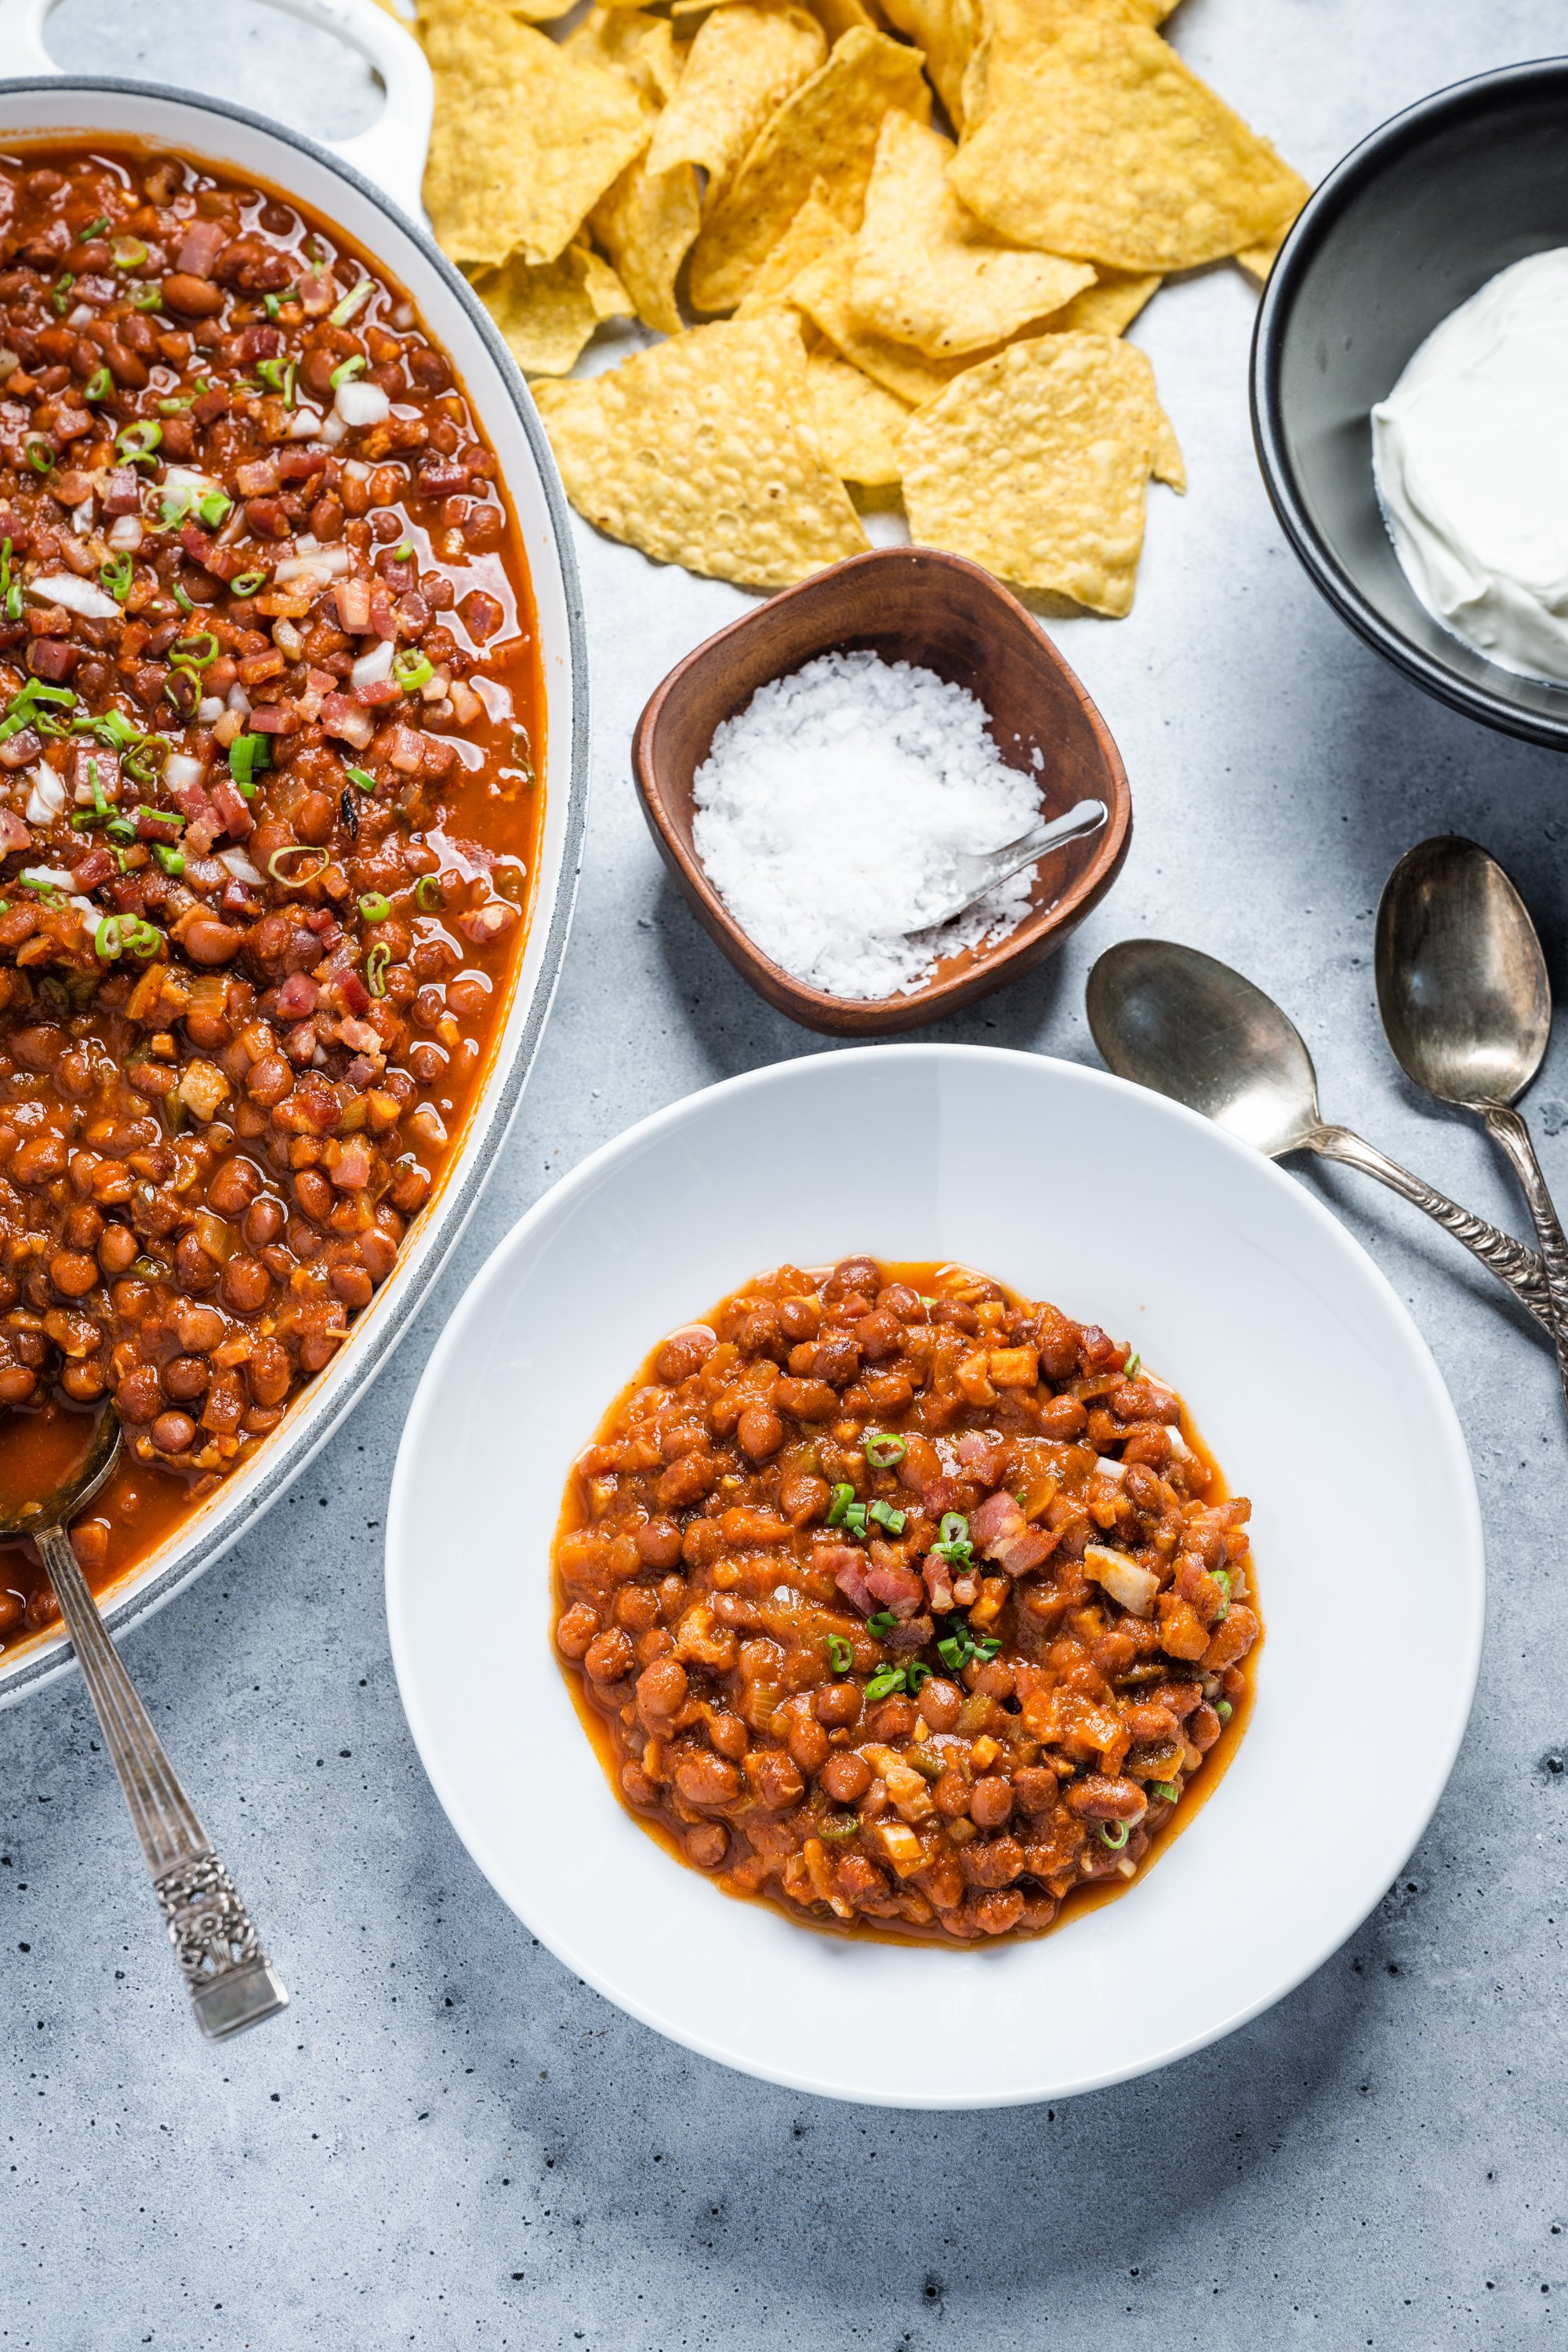 Toss Your Baked Beans Recipes and Try Santa Maria-Style Beans Instead